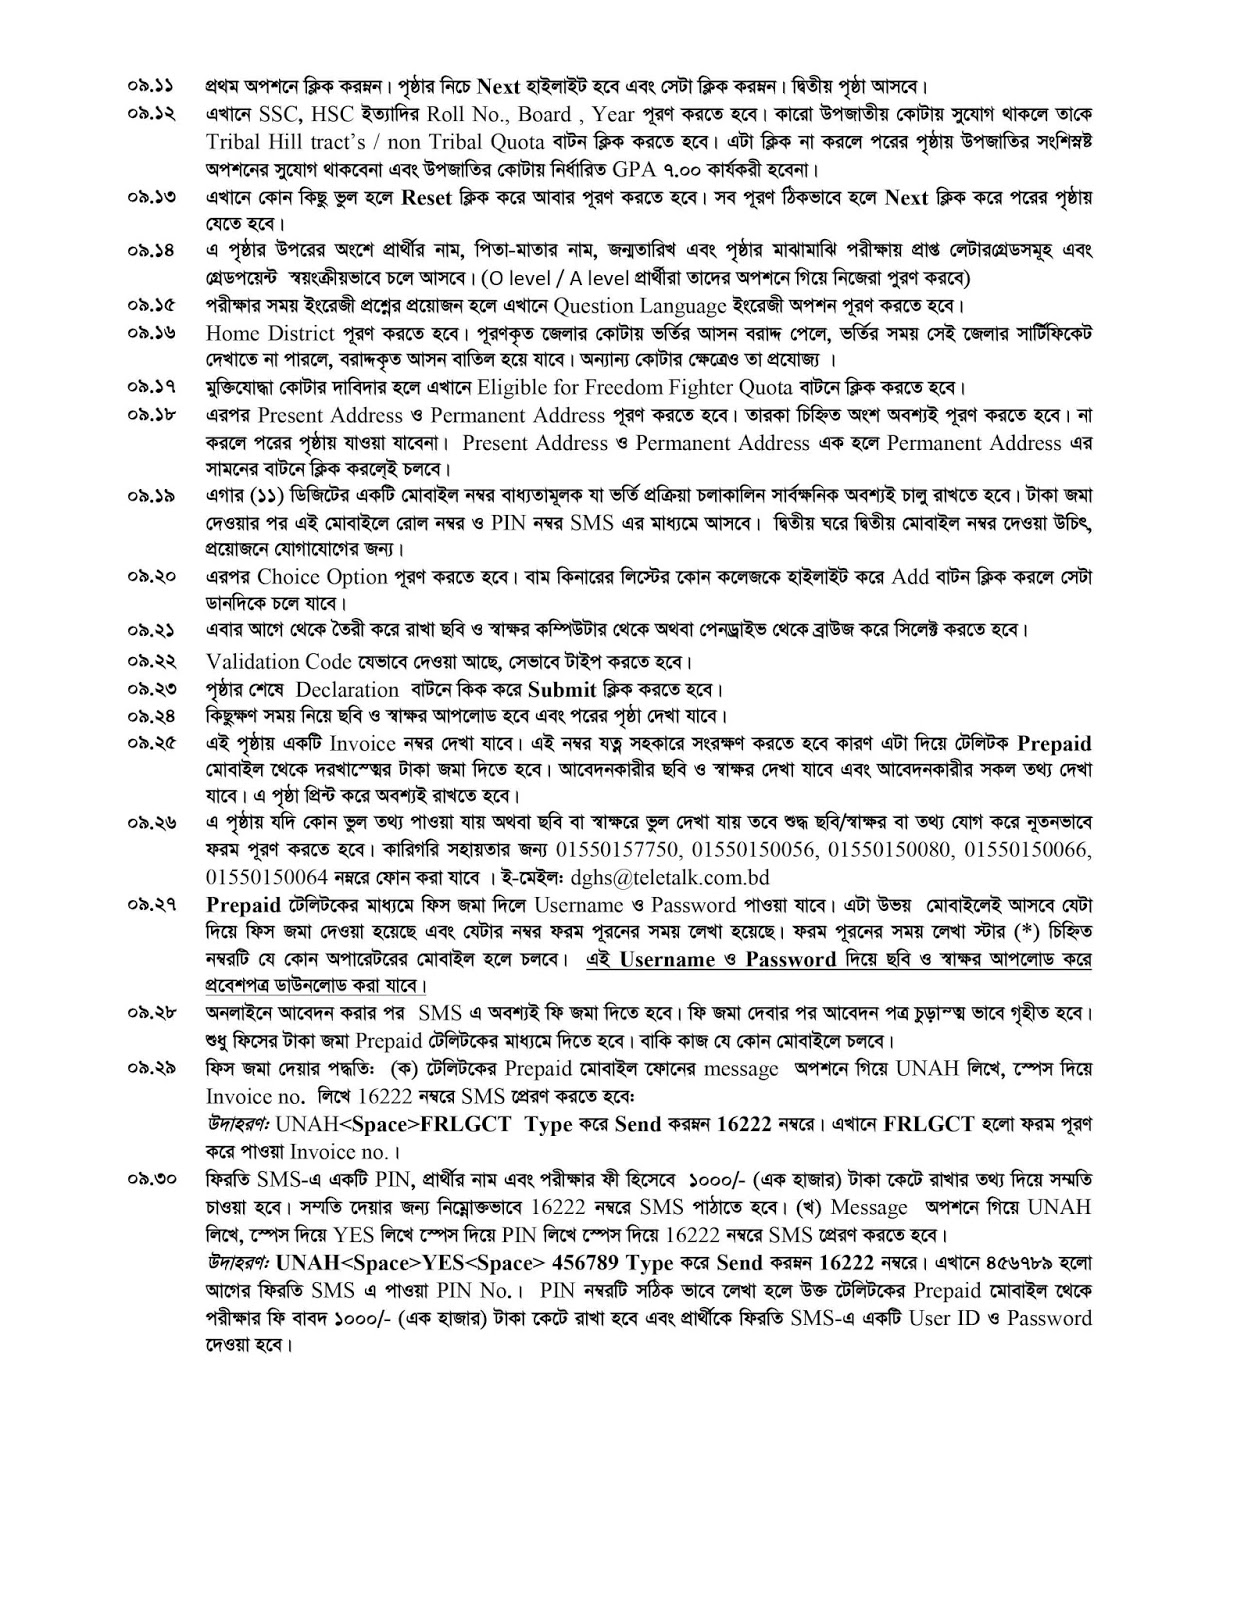 BUMS, BAMS and BHMS Admission Test Circular 2018-2019